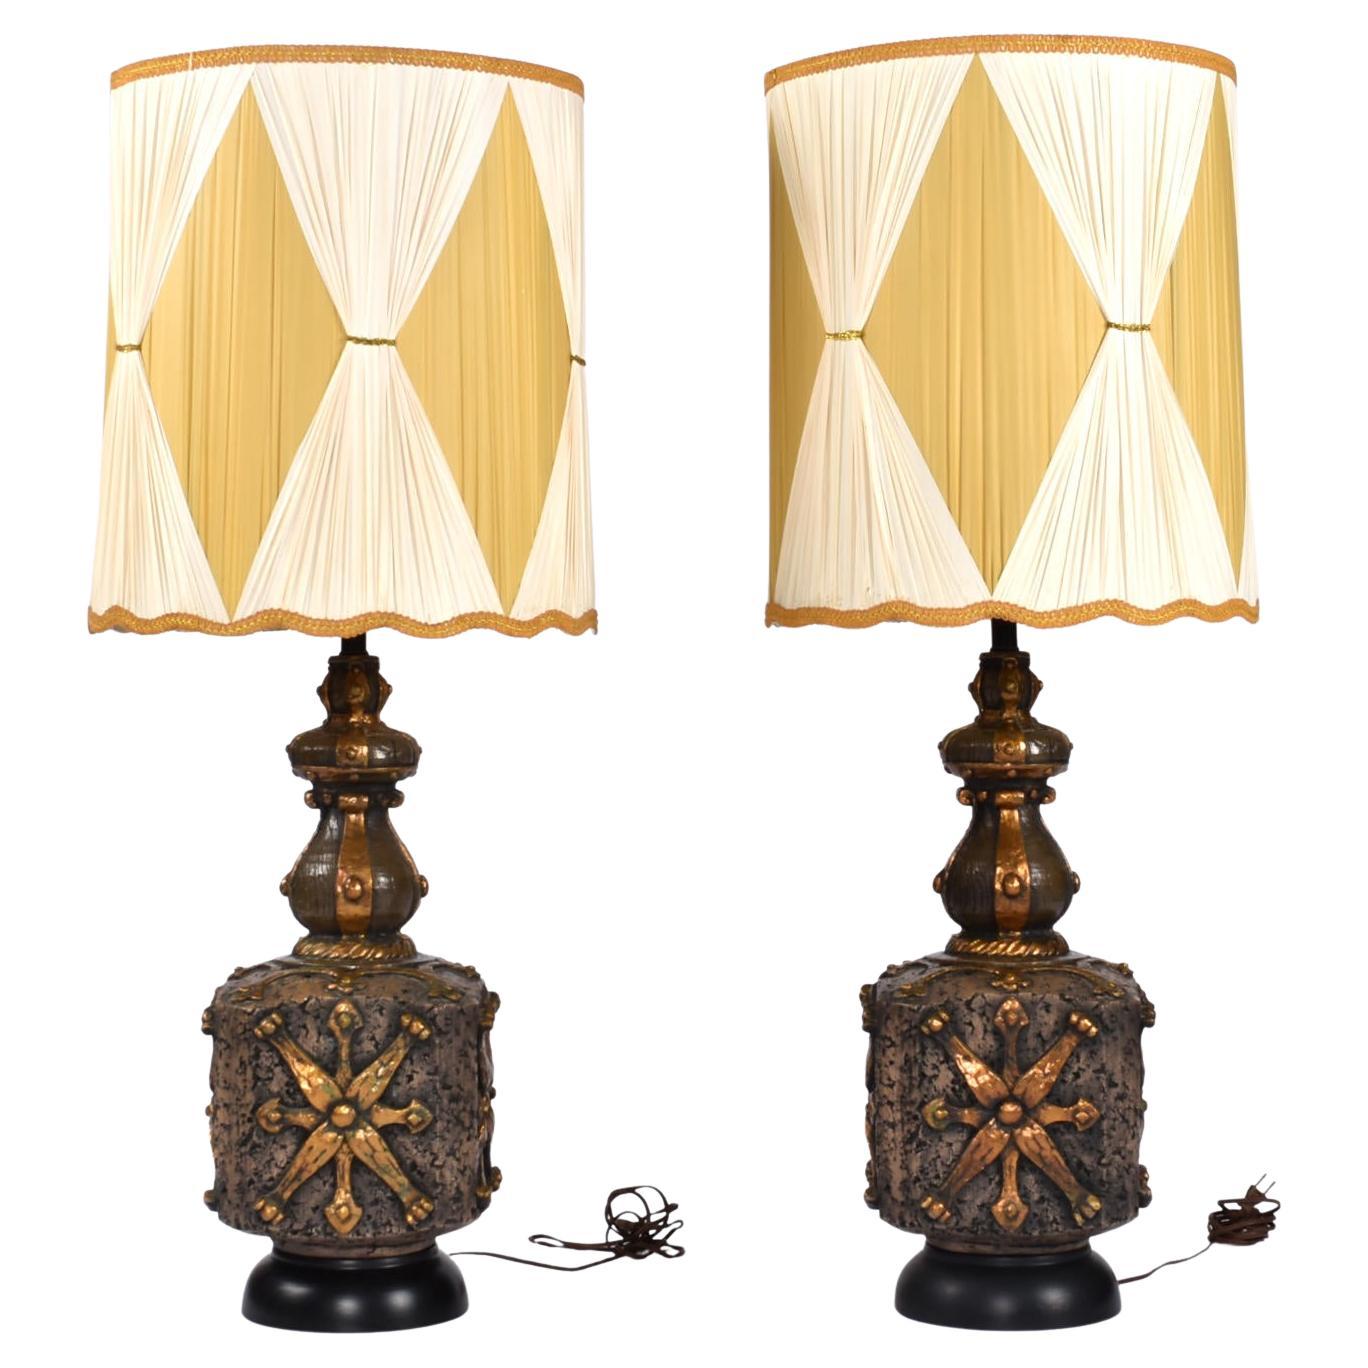 Pair of outstanding vintage over-sized Brutalist lamps. If you’re looking to make a statement, look no more. These exceptional lamps are larger than life with their pleated, draped shades and richly textured surfaces. Bold is the operative word. The